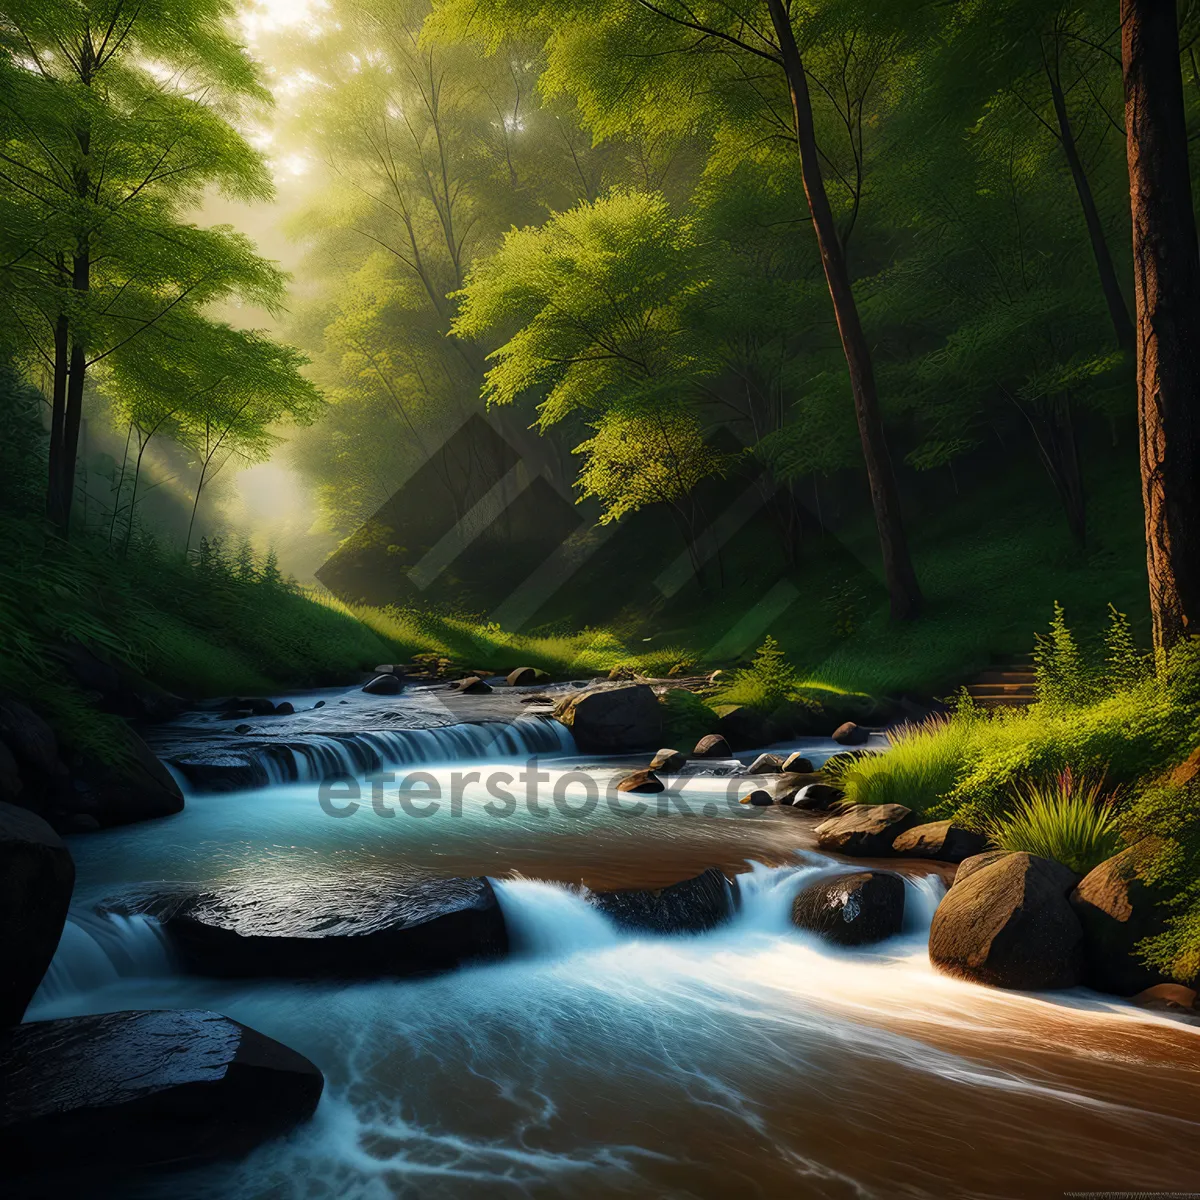 Picture of Serene River Flowing Through Lush Forest